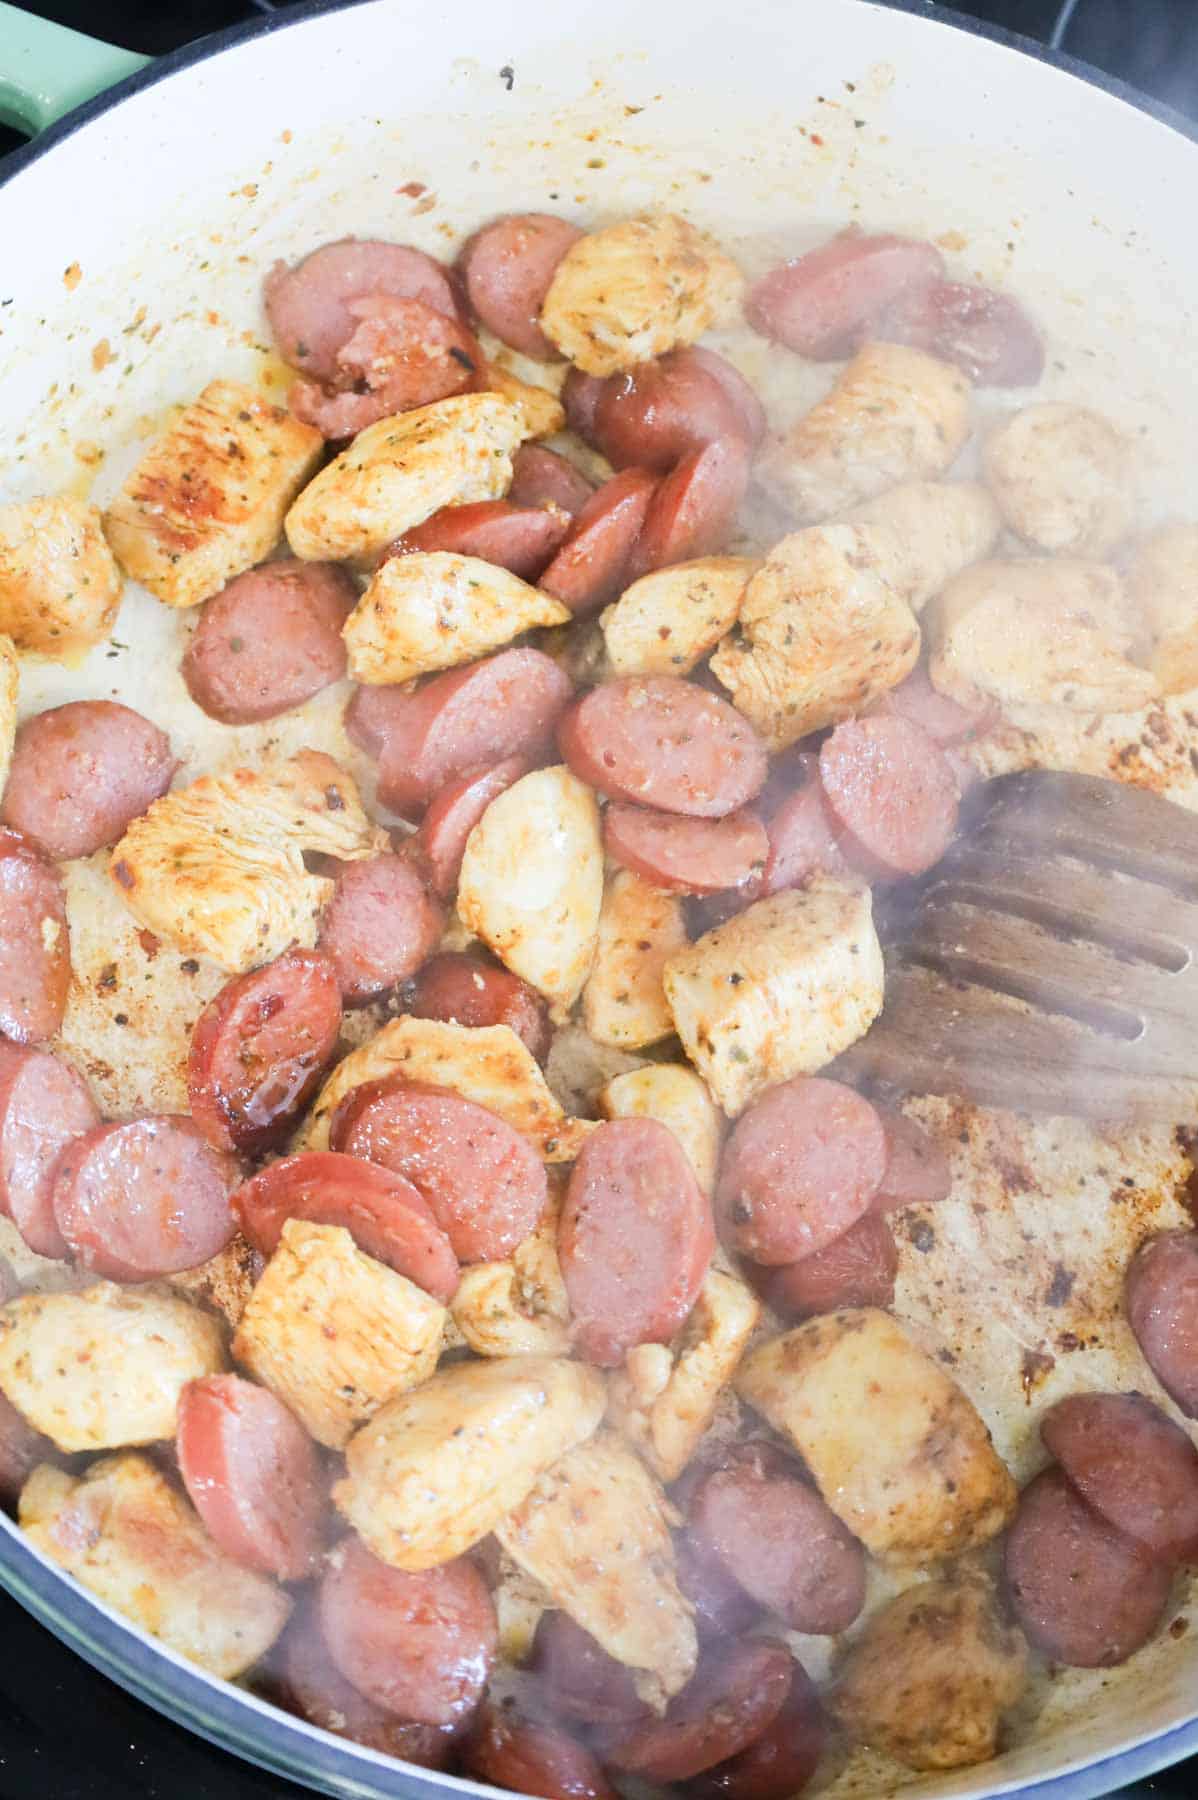 sliced smoked sausage and chicken breast chunks cooking in a skillet